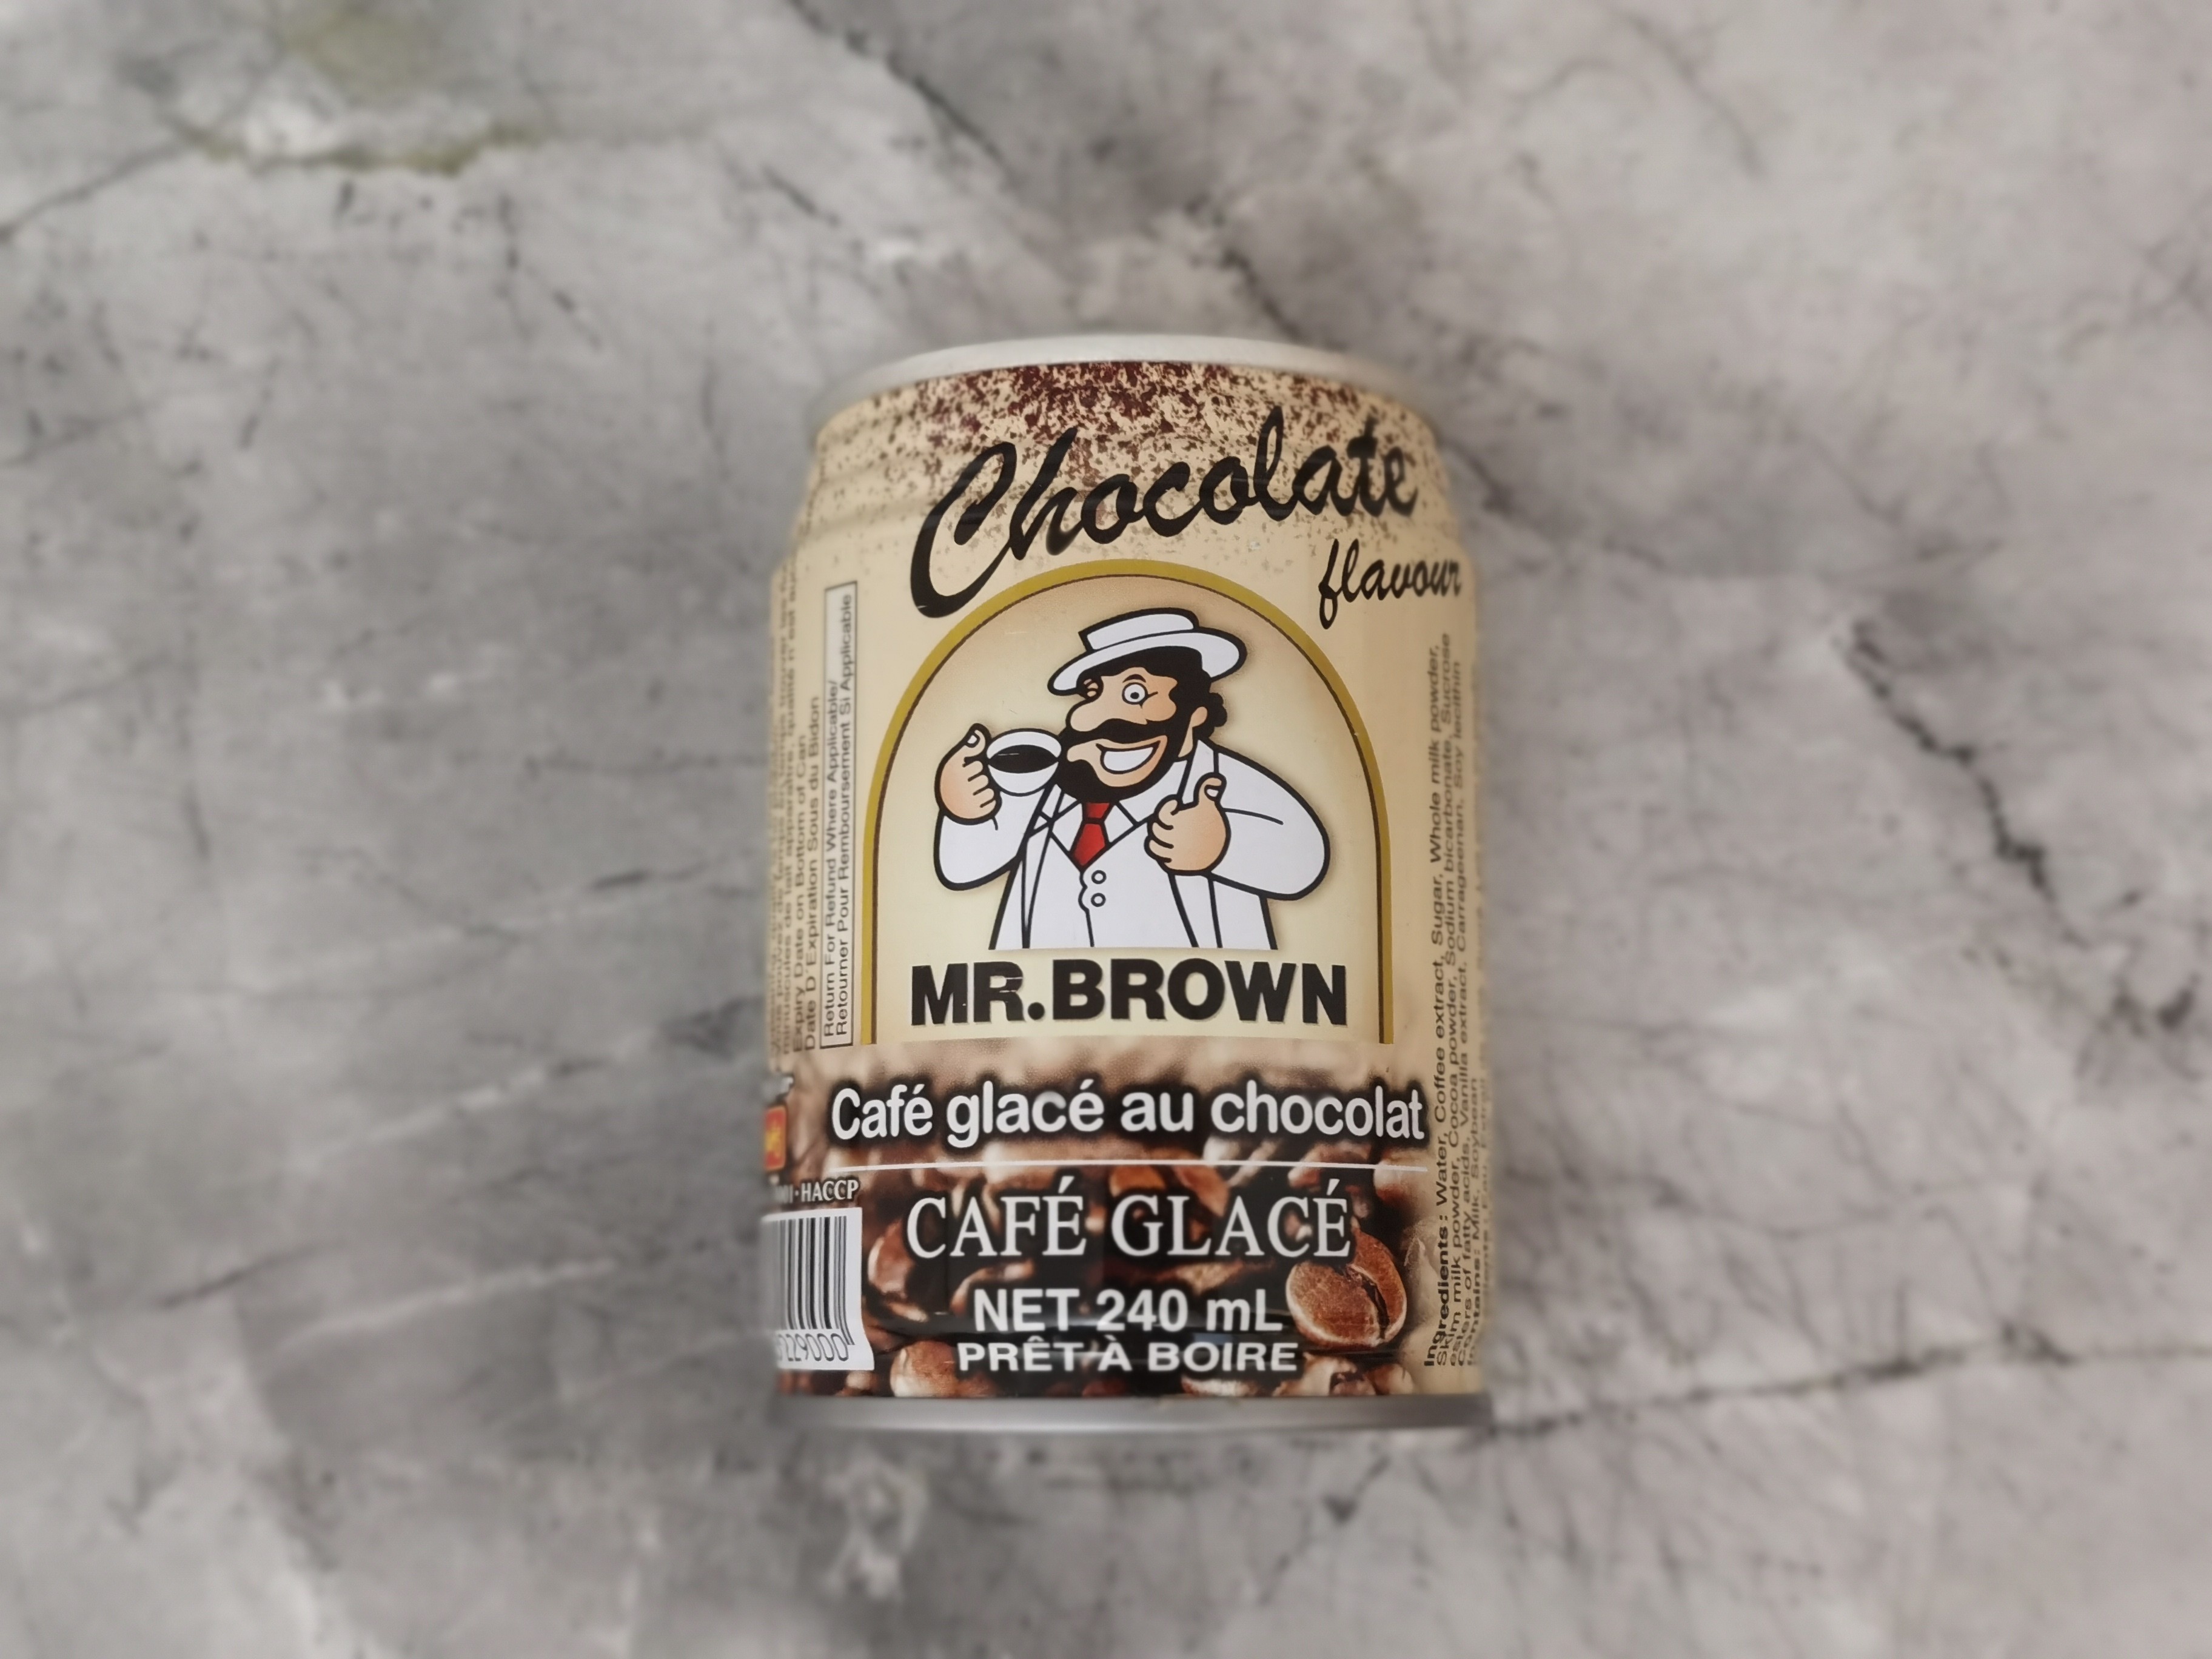 Mr. Brown Chocolate Flavour Iced Coffee Can on marble background
